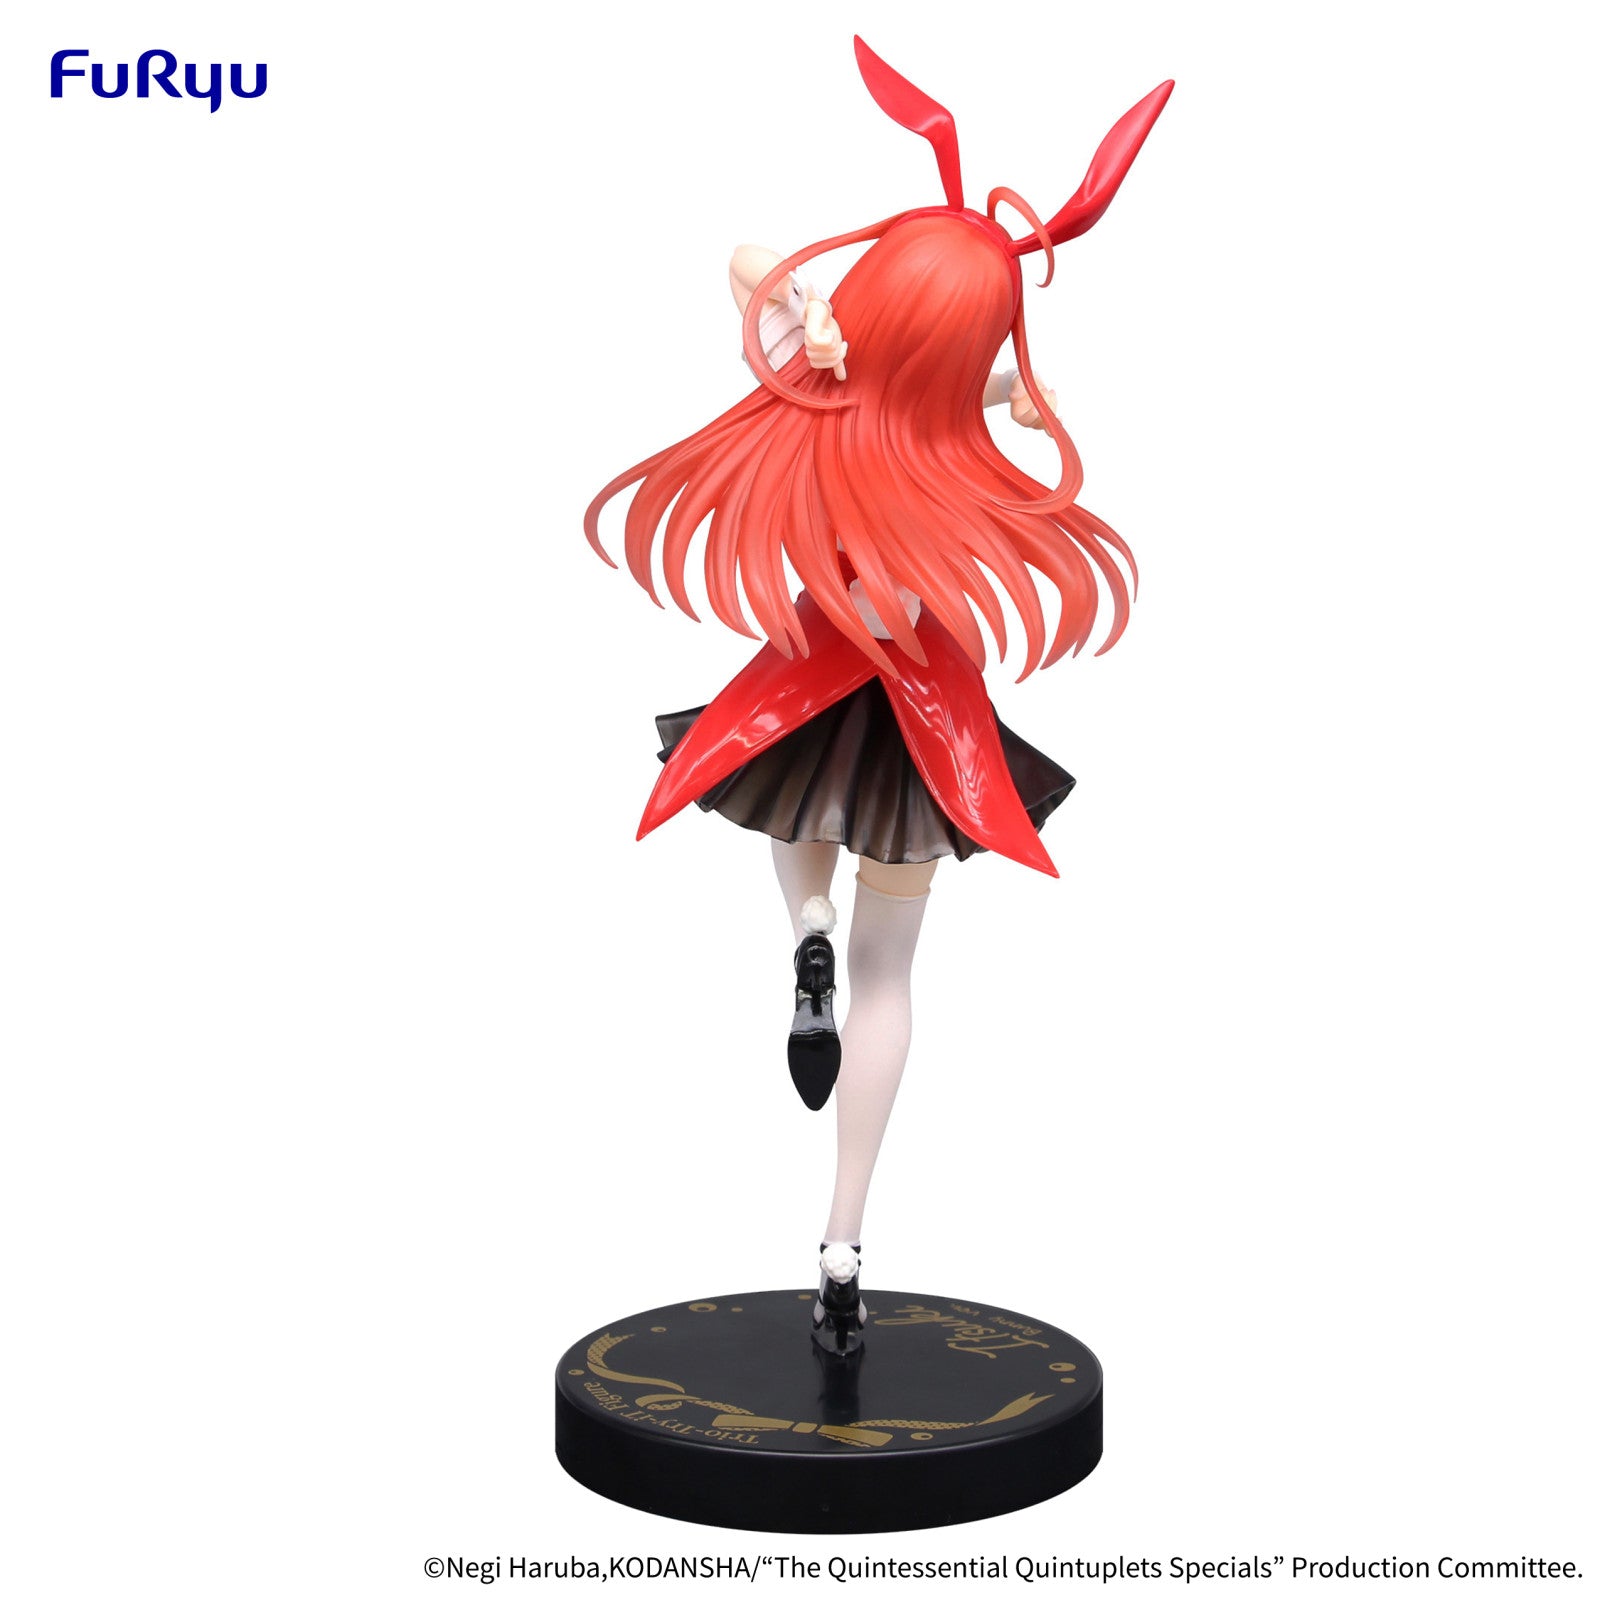 PRE ORDER The Quintessential Quintuplets Specials: TRIO TRY IT FIGURE - Nakano Itsuki Bunnies Version (Another Color)